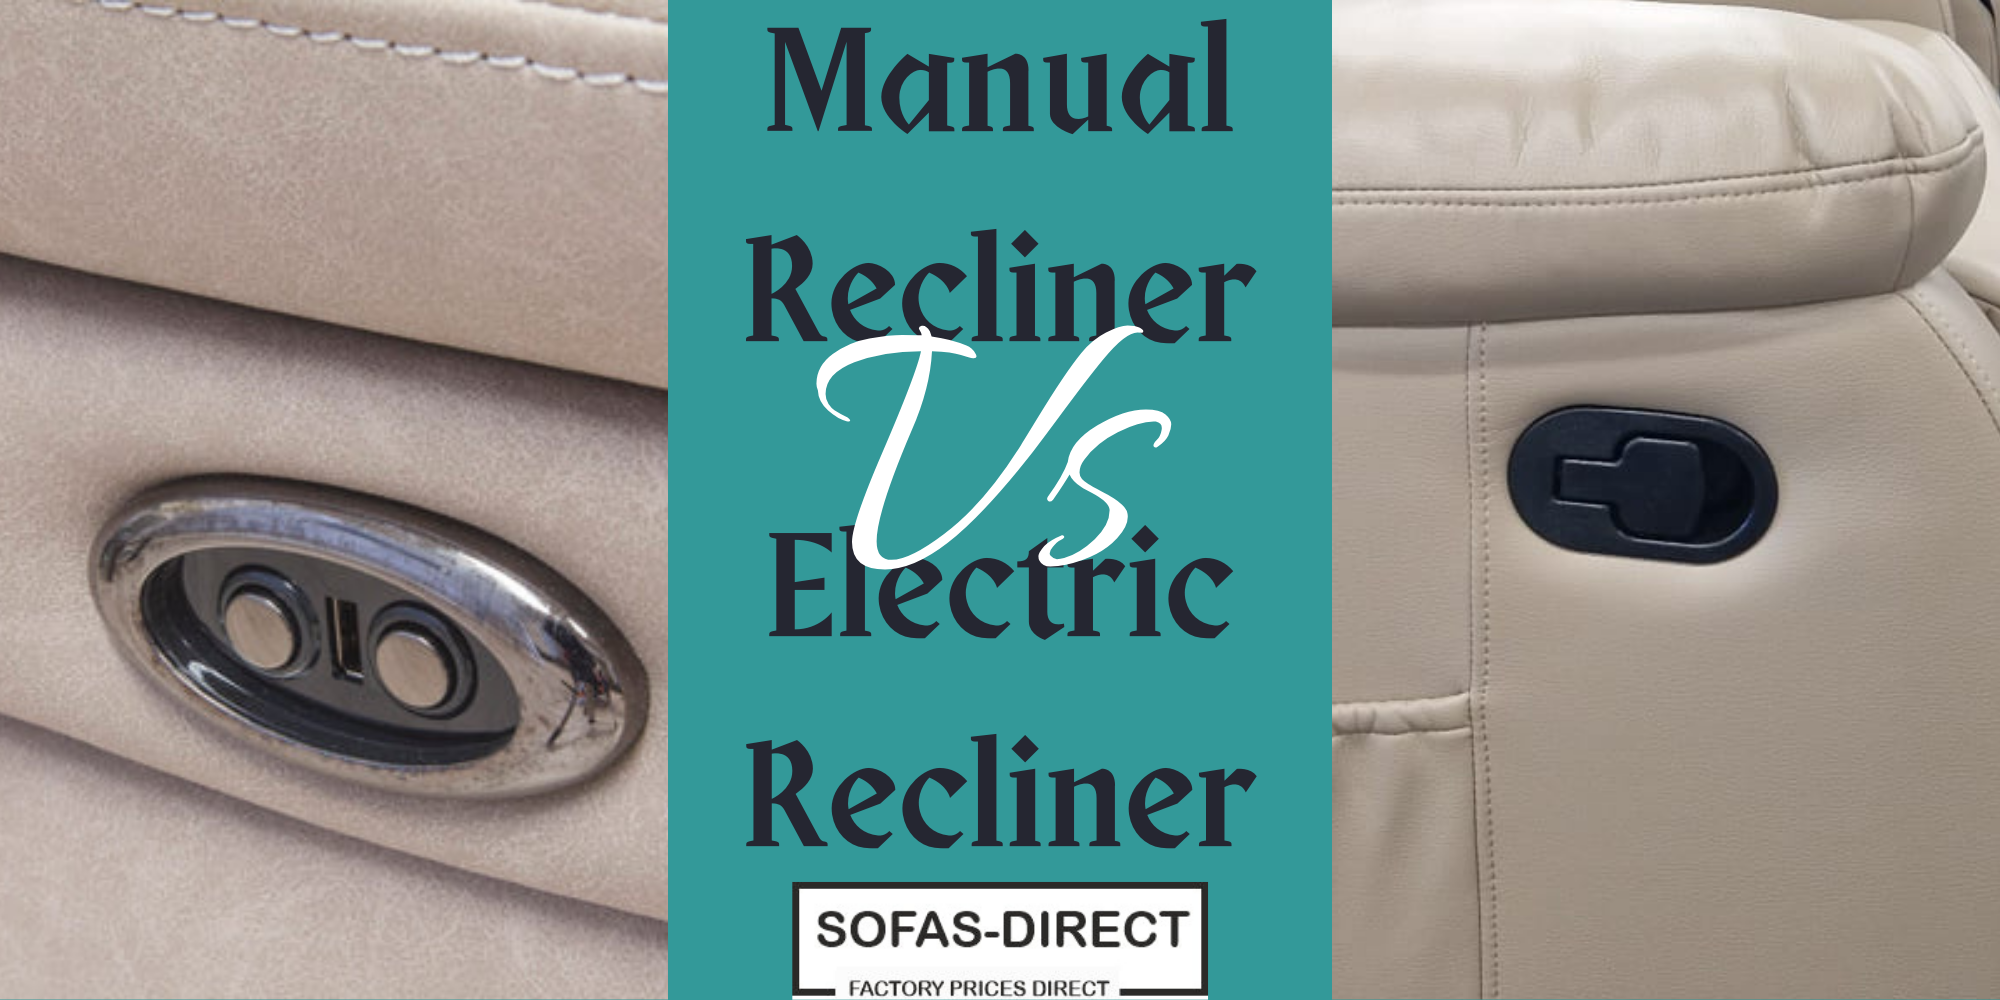 Manual vs. Electric Recliners: Which Is Right for You?